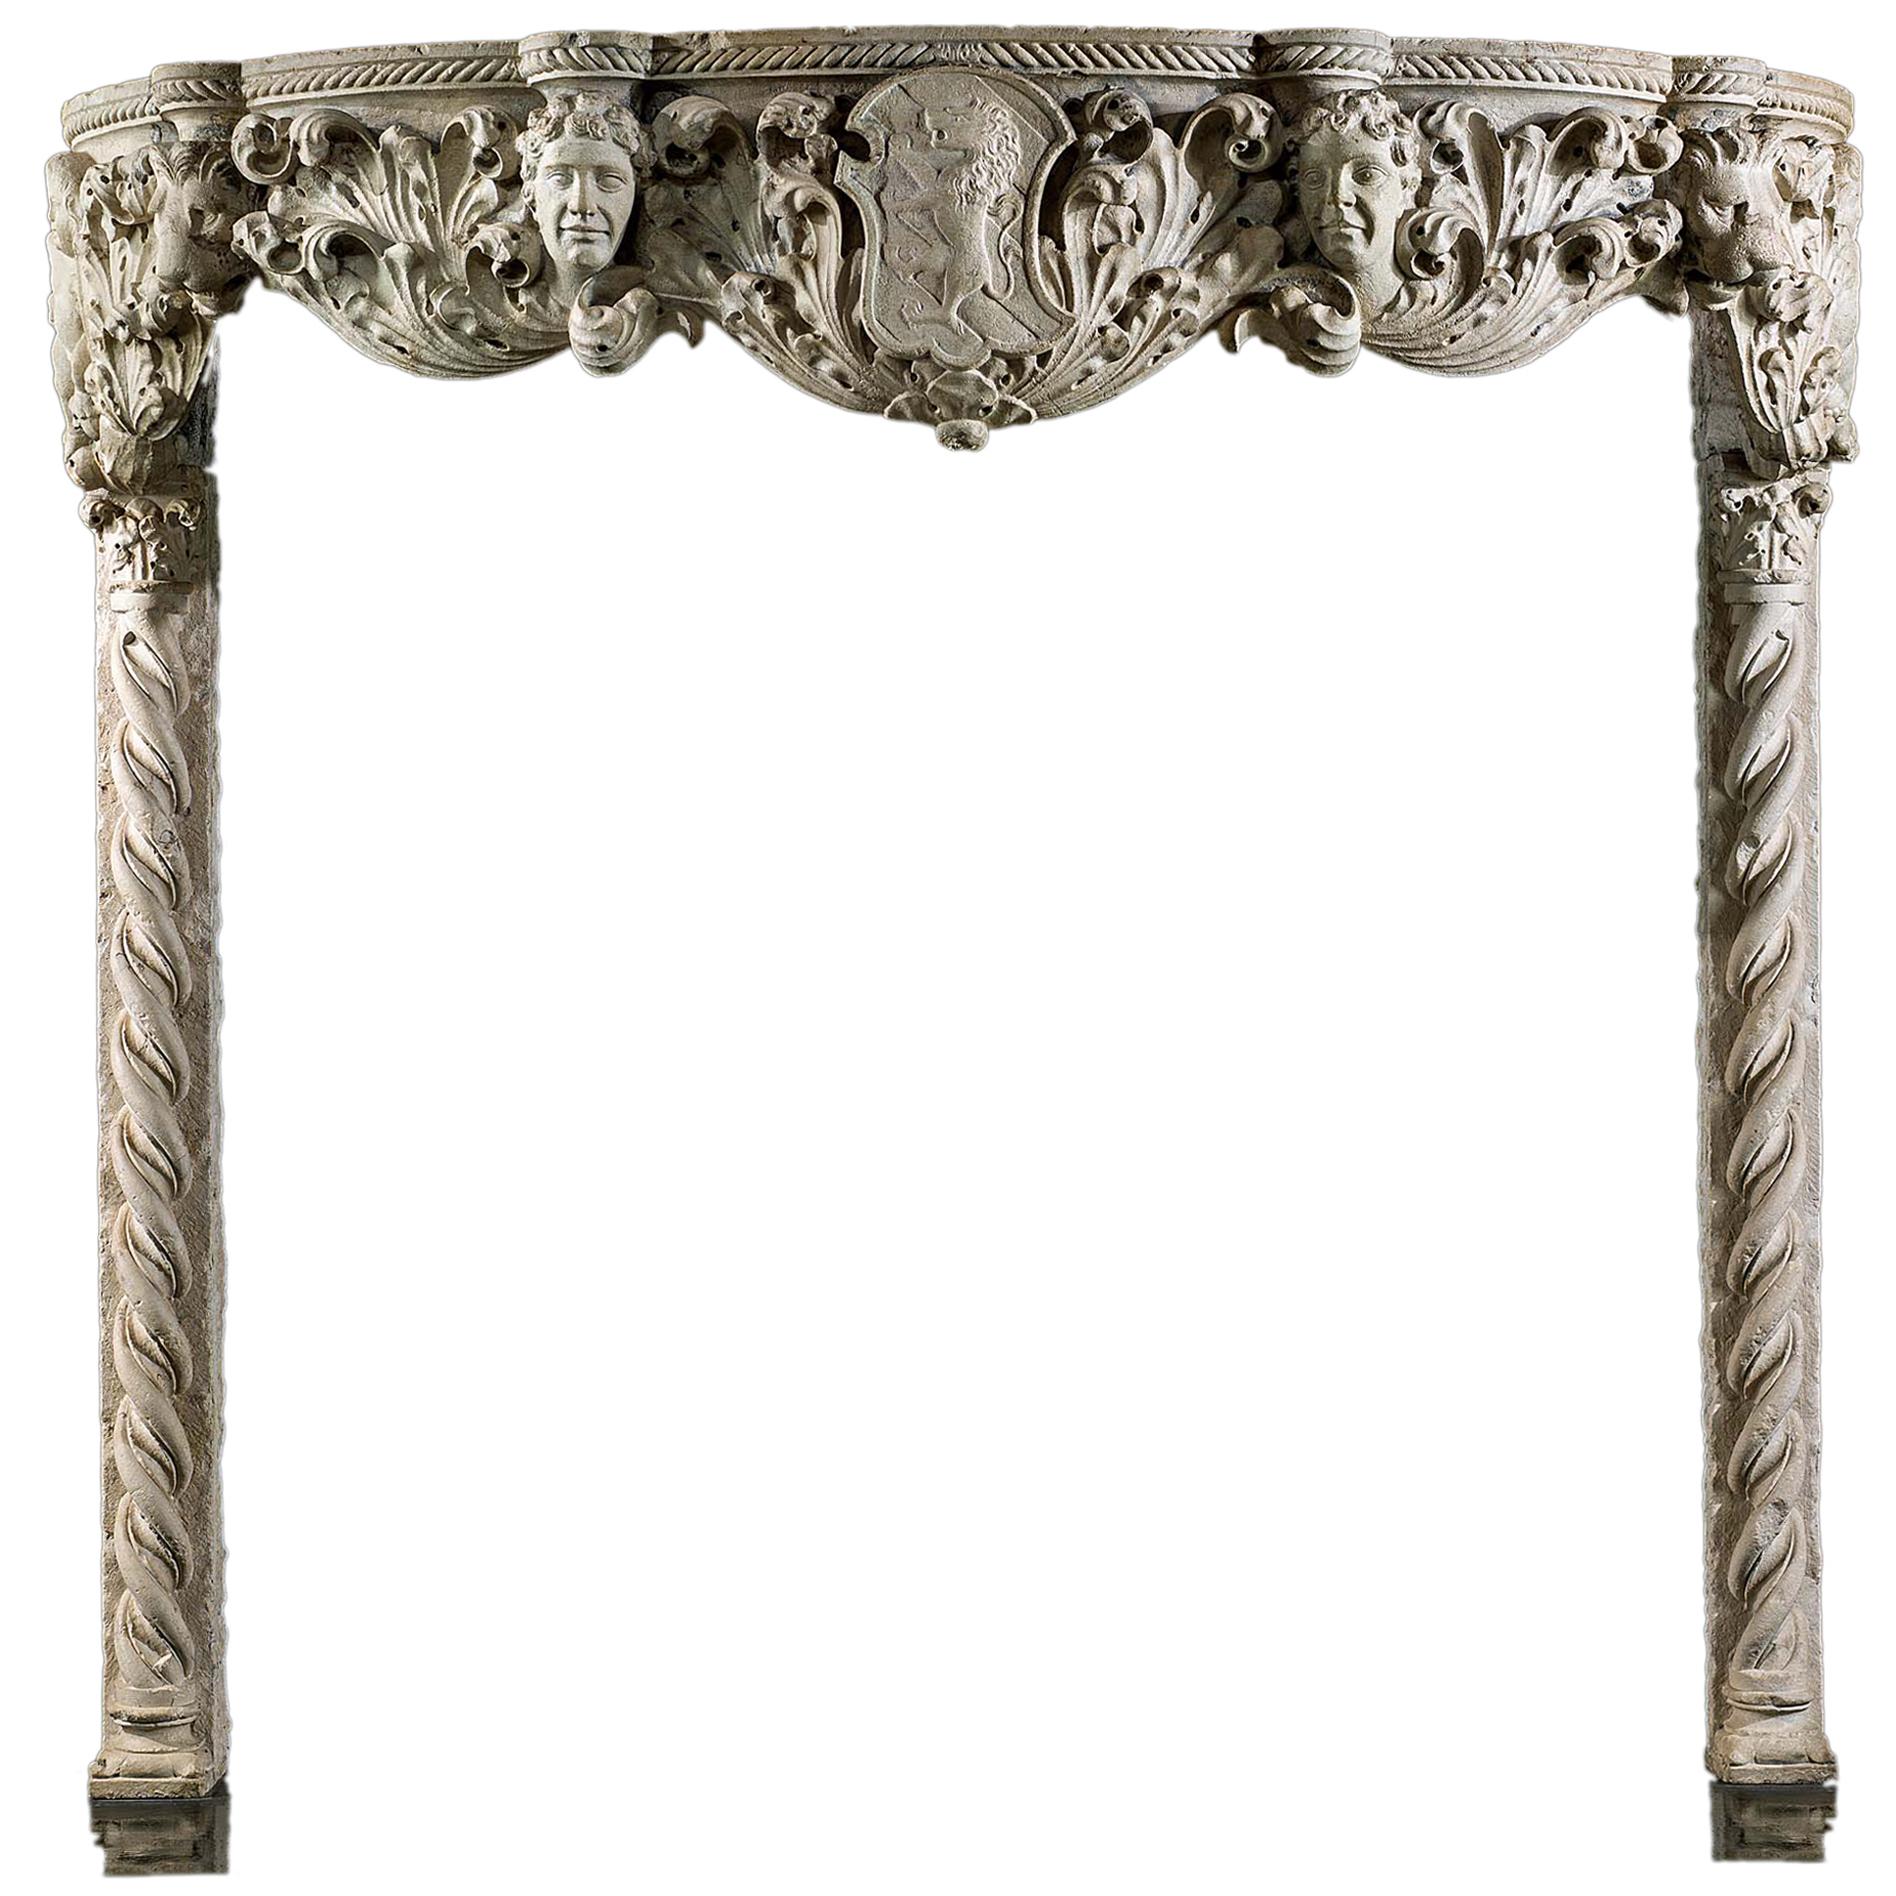 Venetian Renaissance Antique Fireplace from the 15th Century